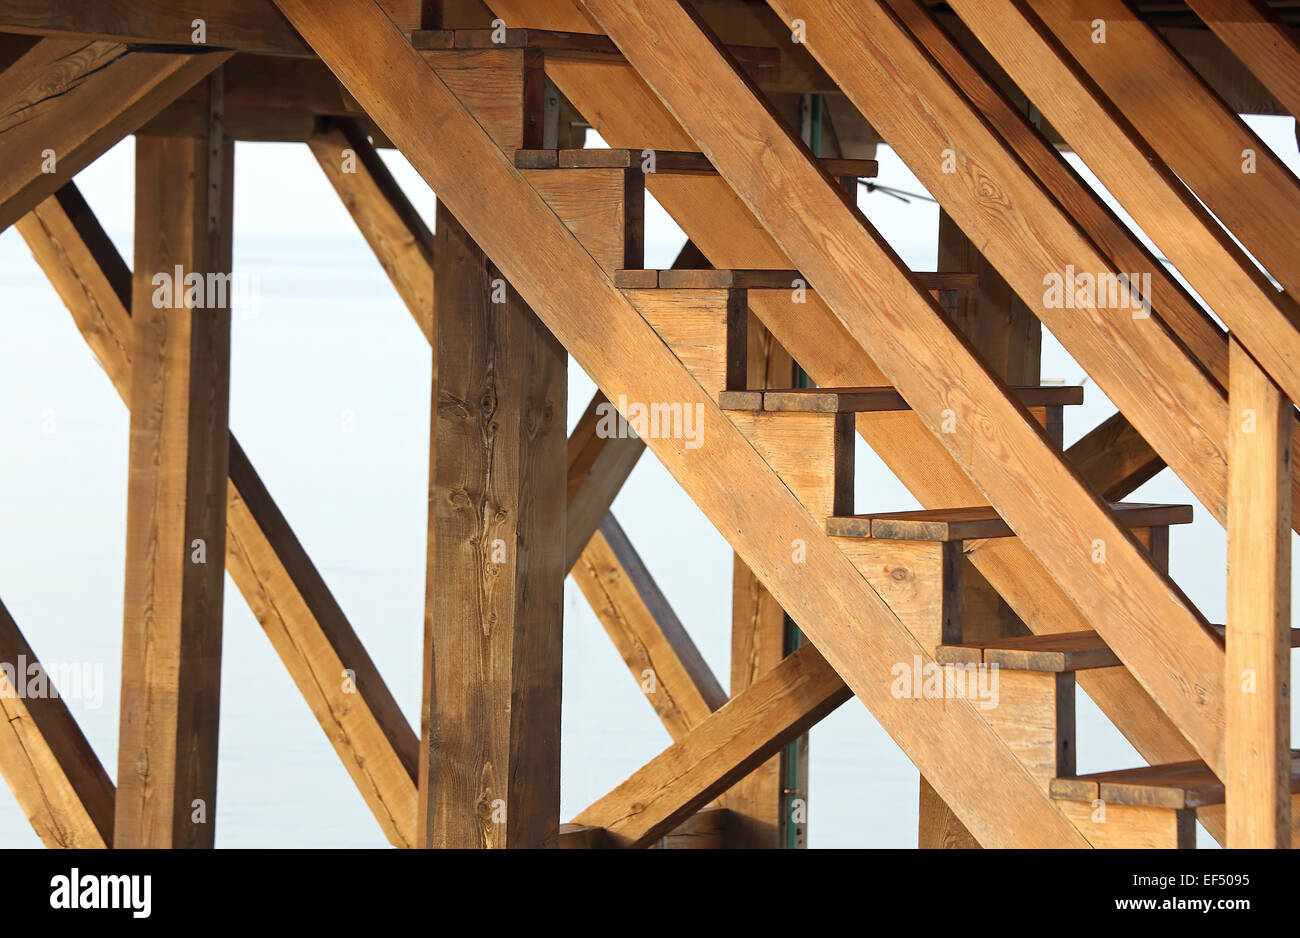 large complicated wooden staircase to climb above a wooden Stilt House overlooking the sea Stock Photo